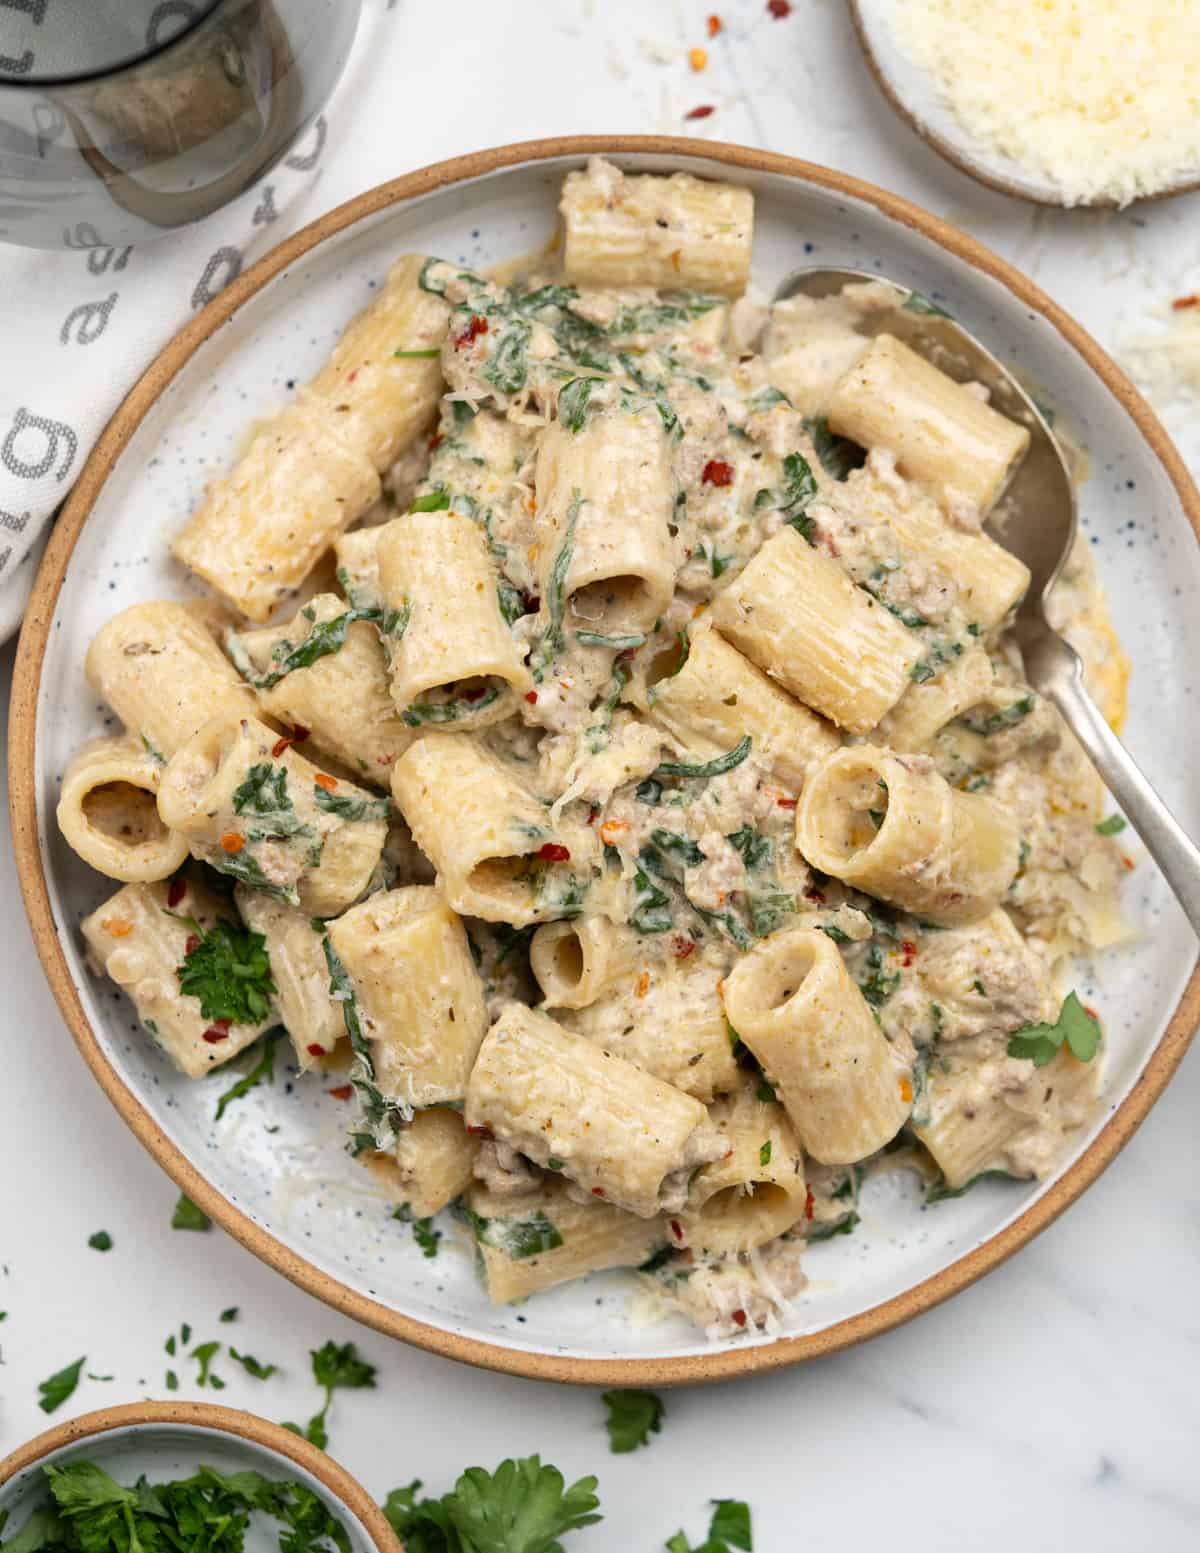 Plate of rigatoni pasta with creamy spinach sausage sauce. 